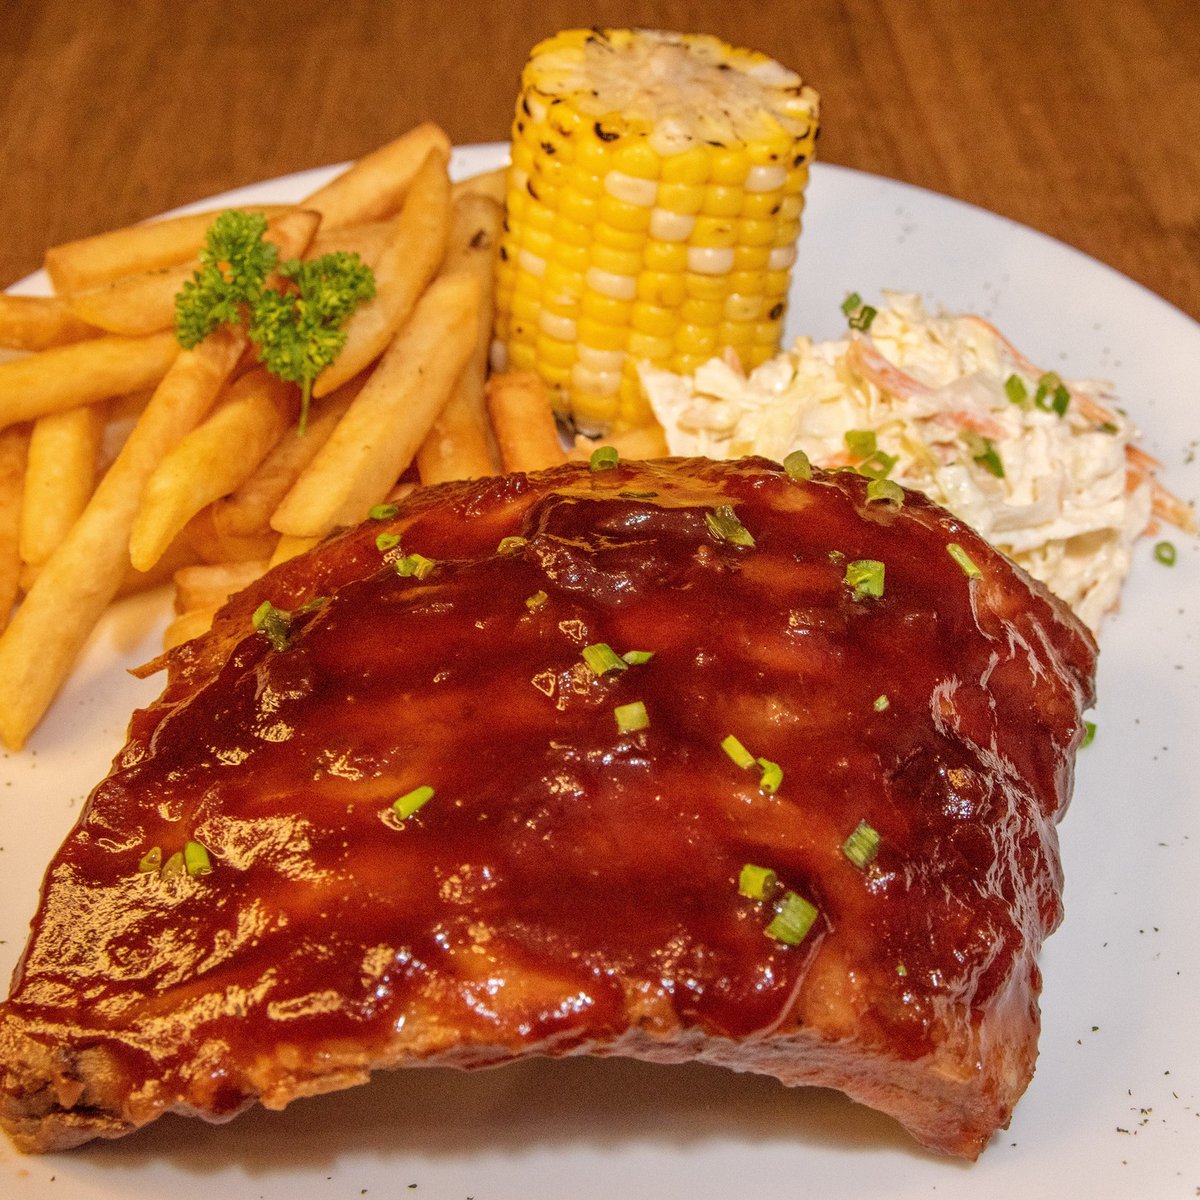 🍖 Get your hands messy and savor the smoky goodness of our tender BBQ ribs! 😋🔥 #BBQRibs #FingerLickinGood